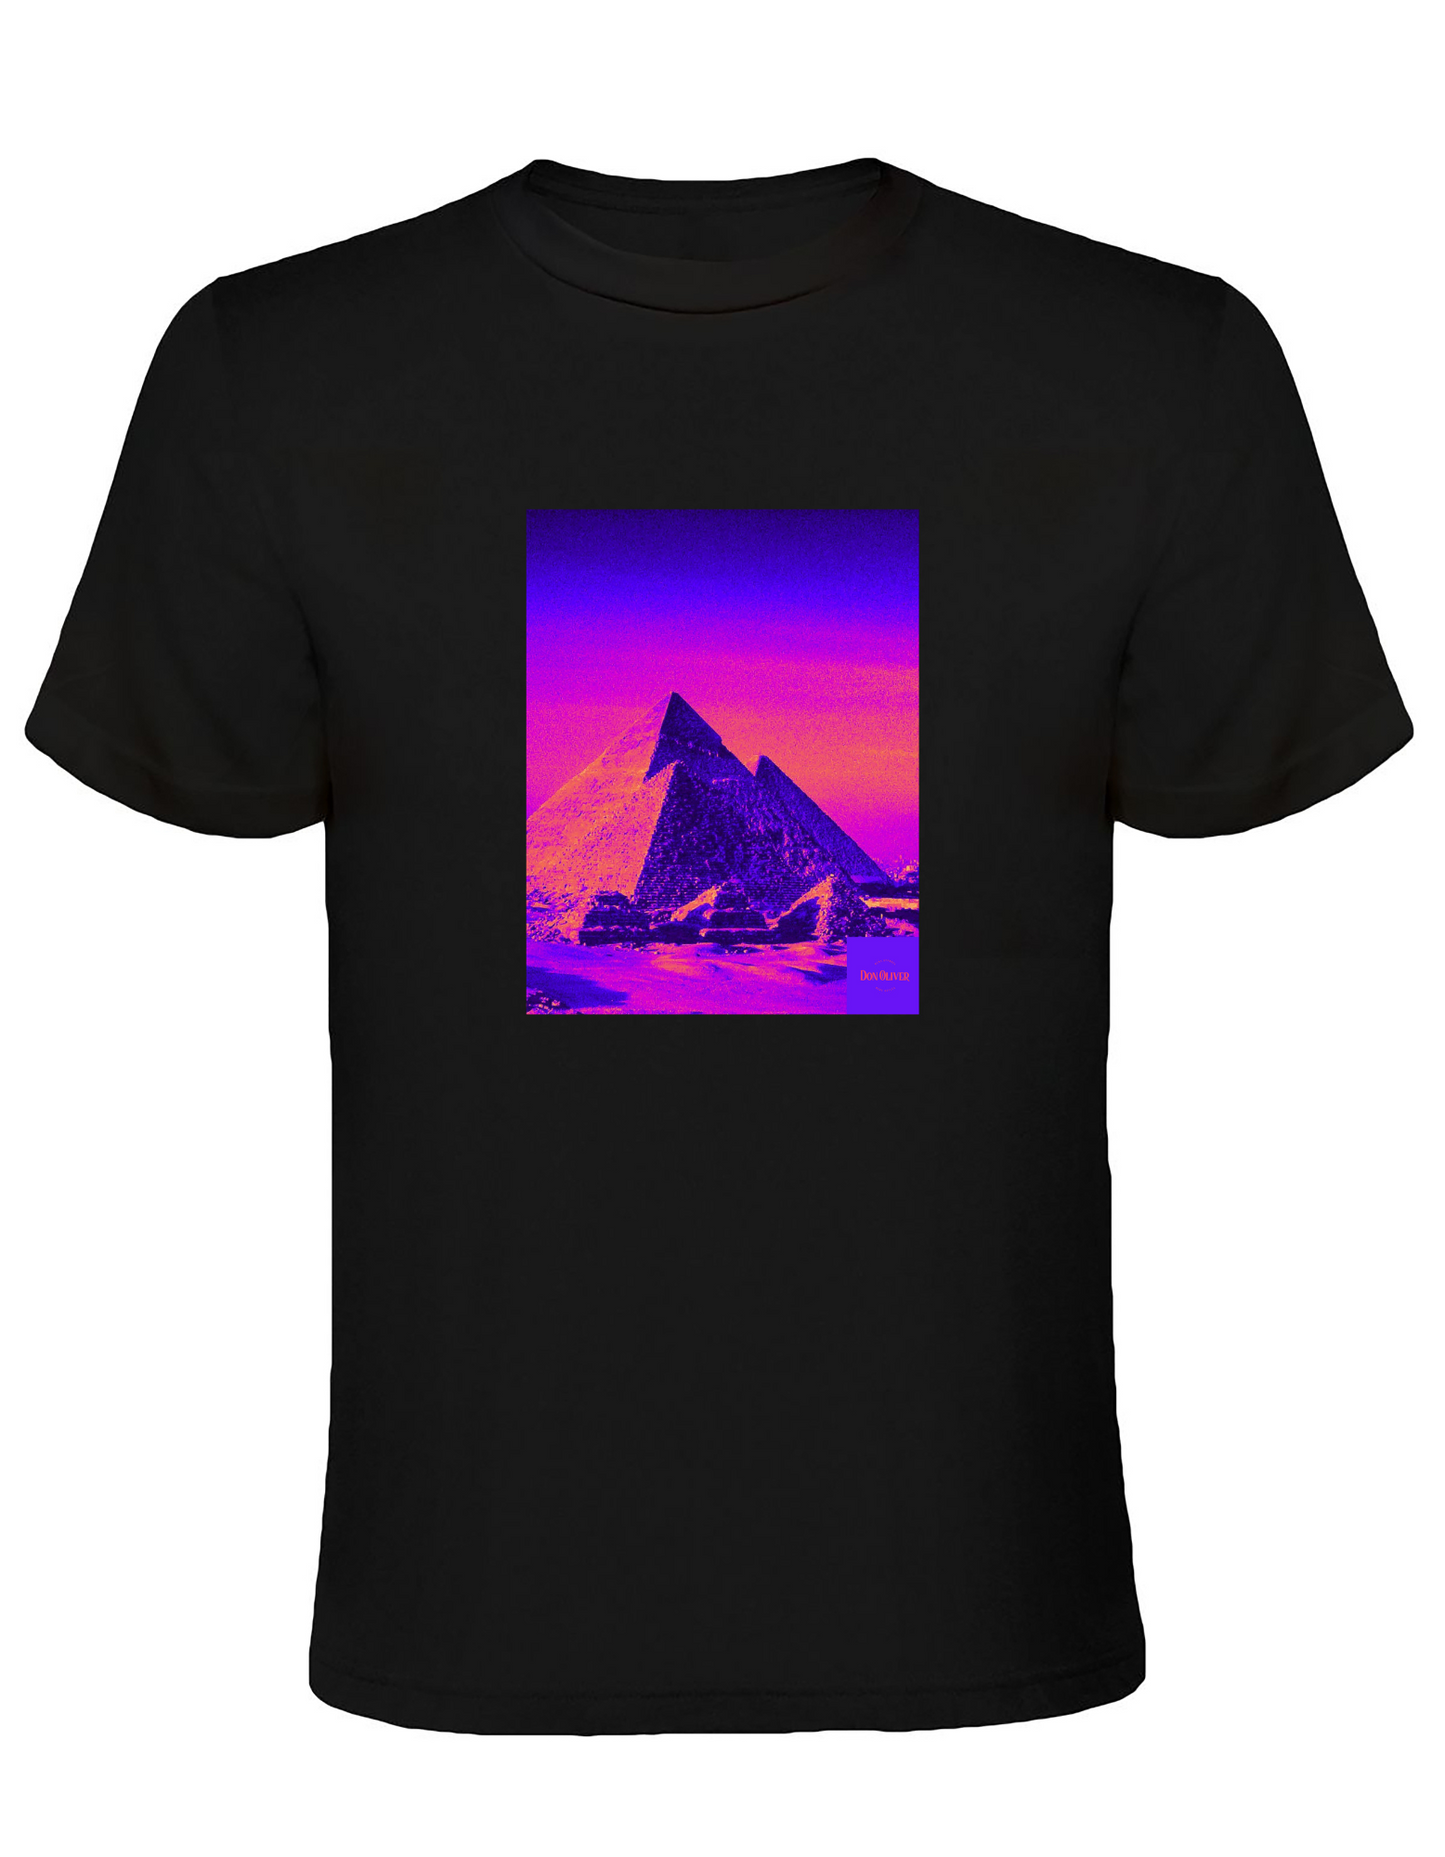 Classic Fit Pyramid Short Sleeve Tee